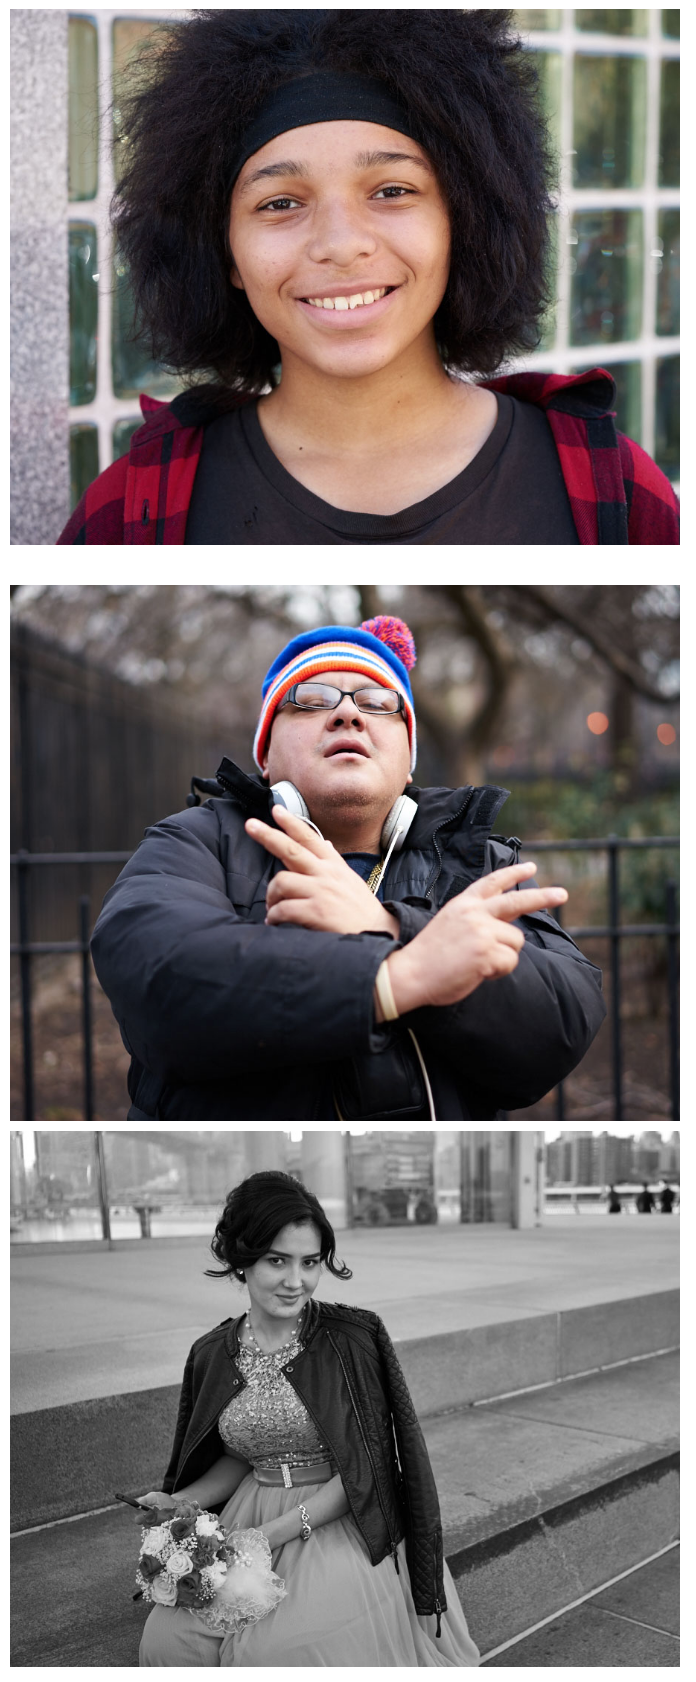 Tutorial: How to Shoot Portraits of Total Strangers